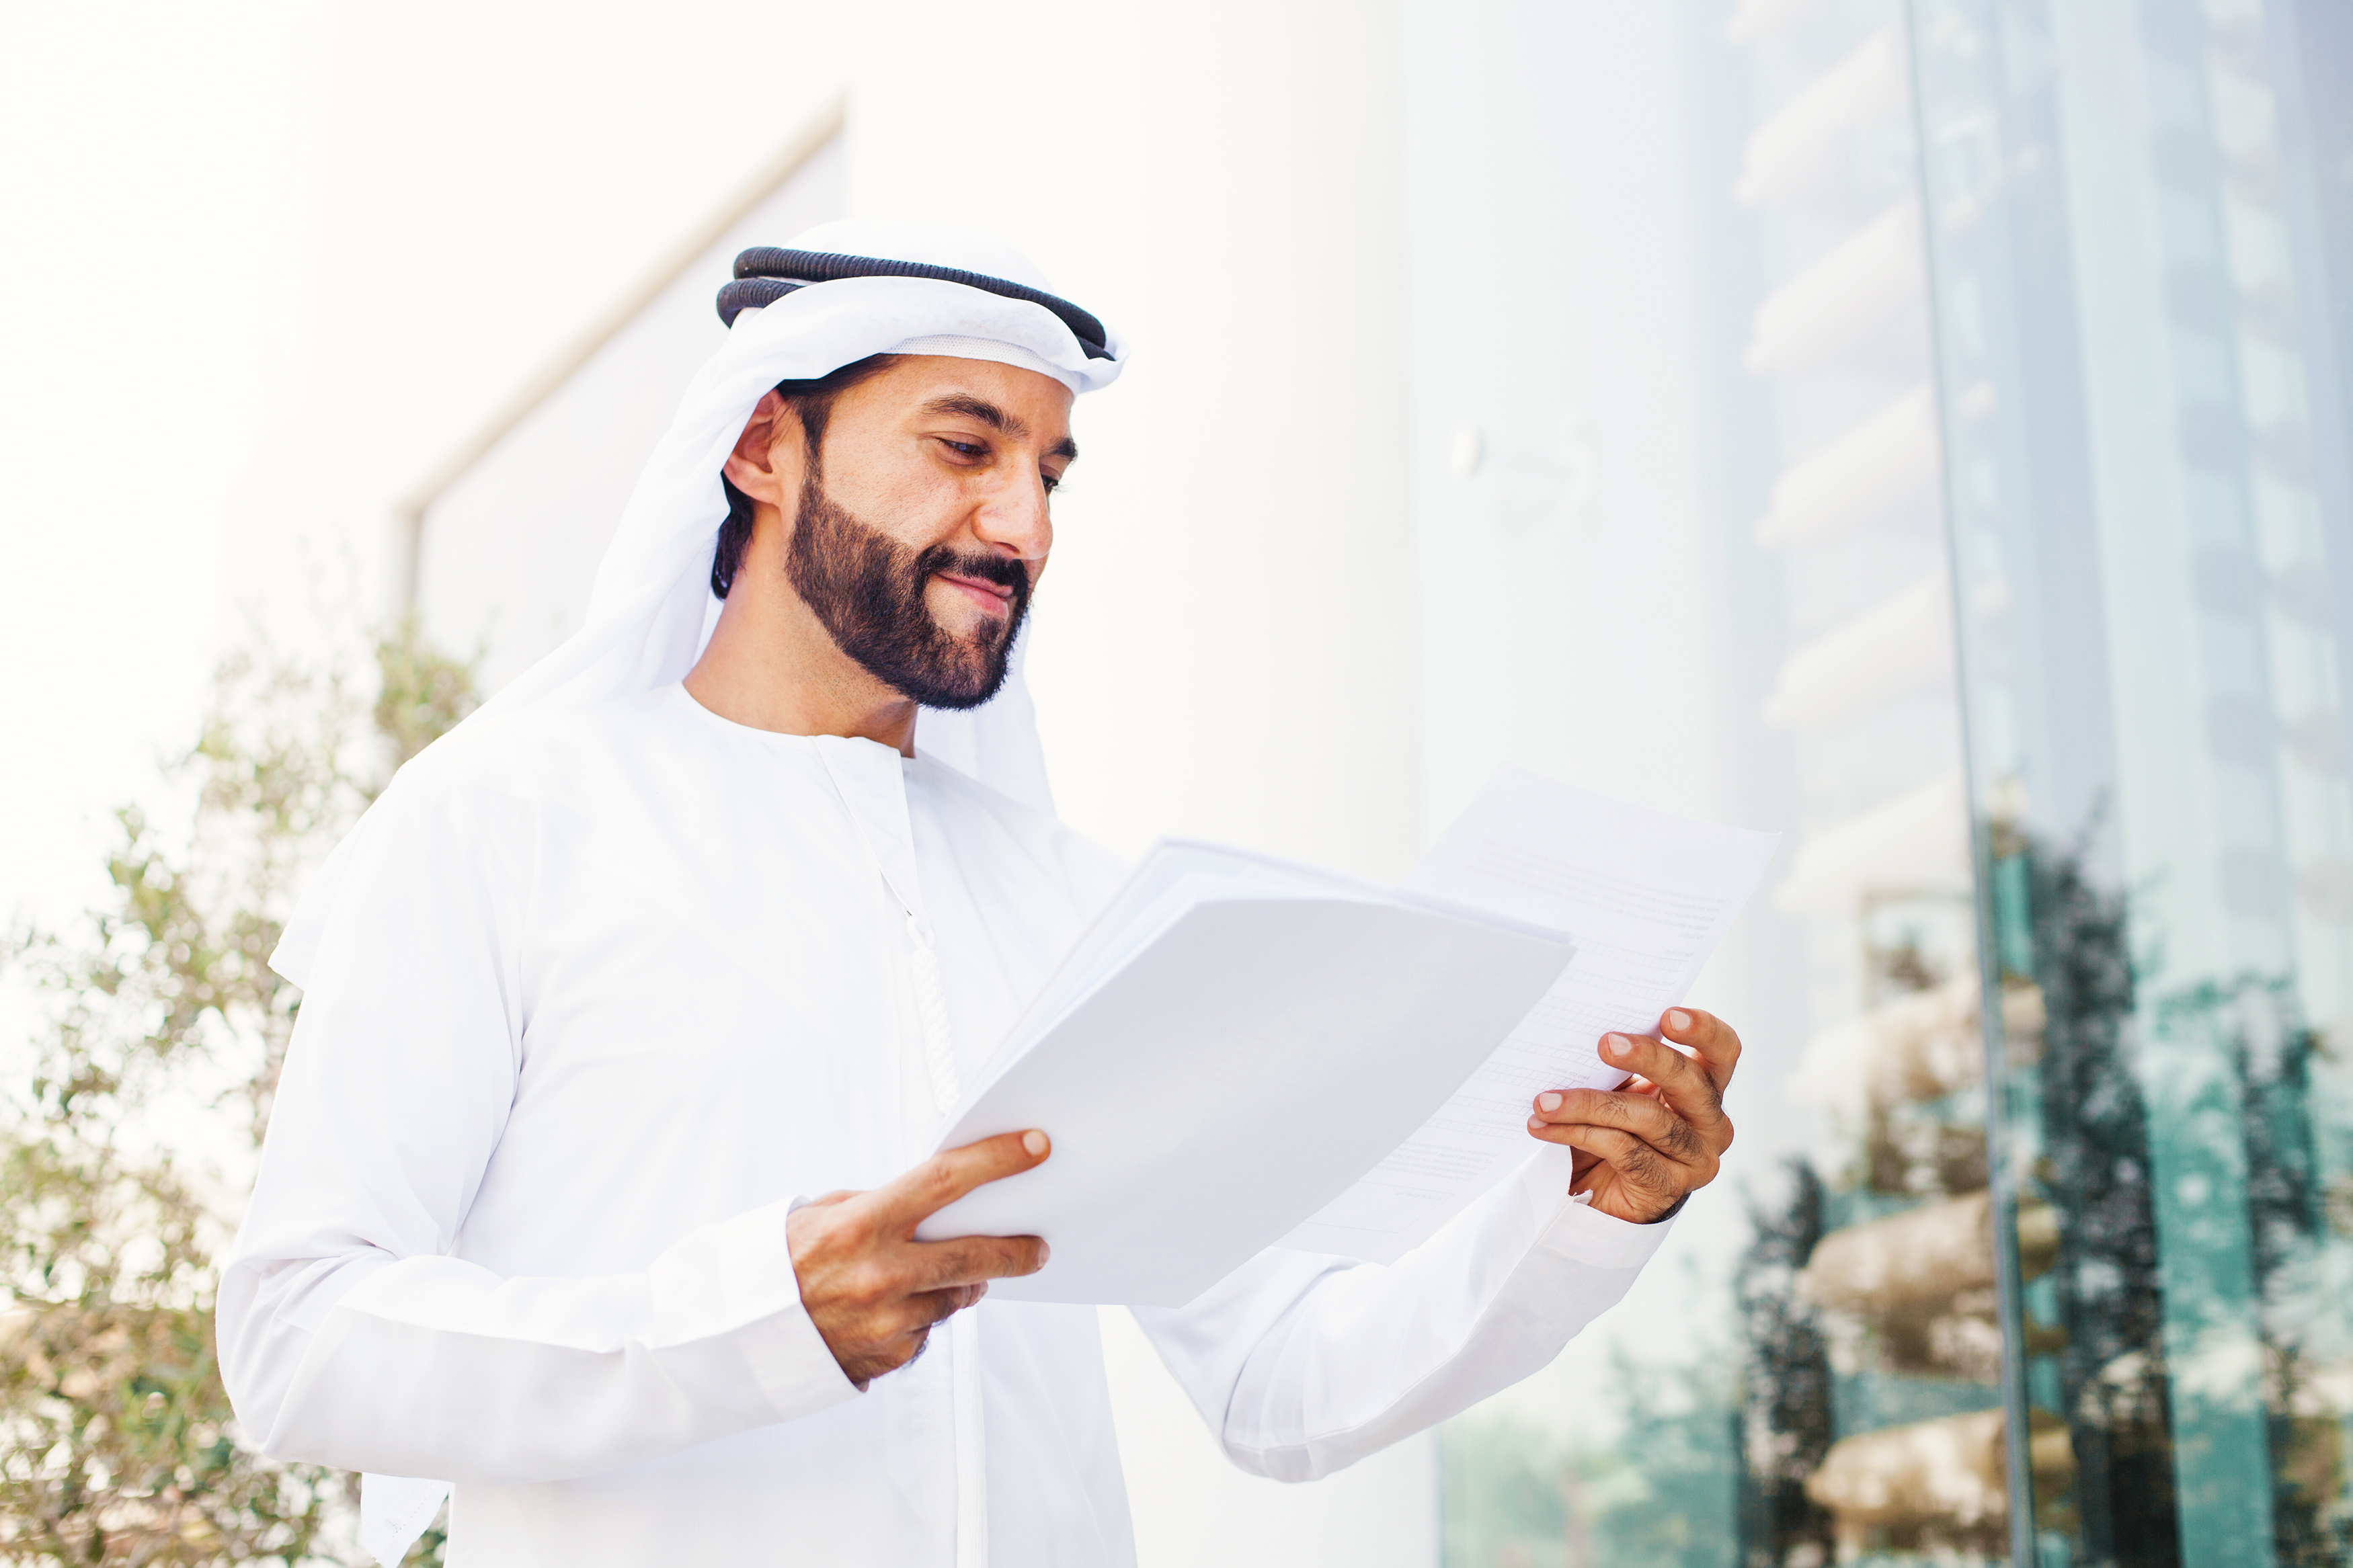 UAE residence permit documents to buy real estate